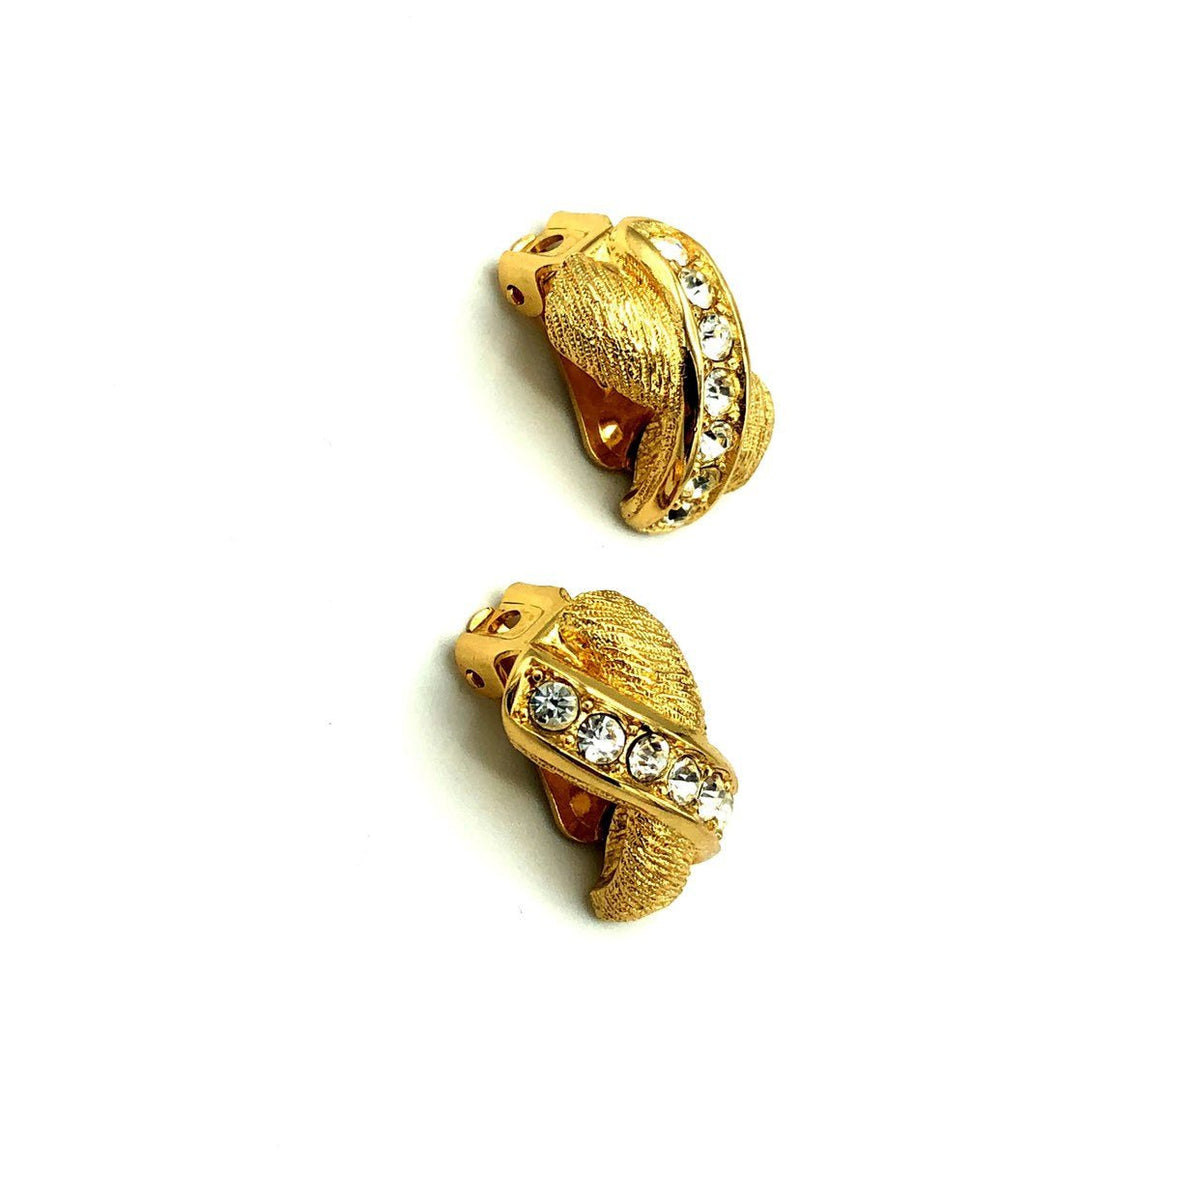 Christian Dior Petite Classic Rhinestone Vintage Clip-On Earrings - 24 Wishes Vintage Jewelry